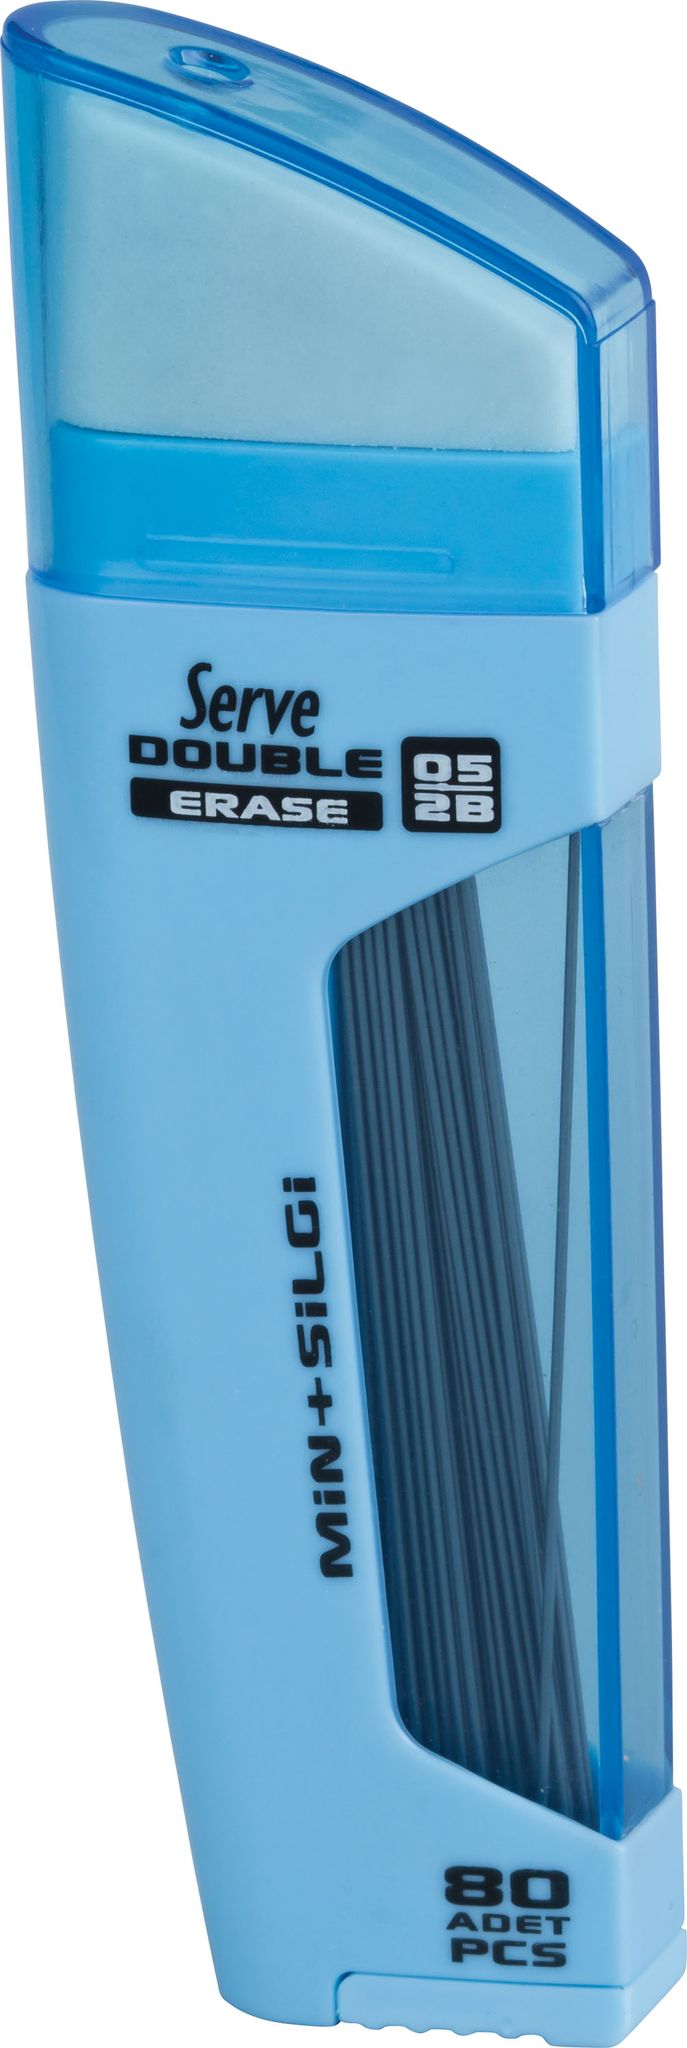 ERASER & PENCIL LEAD 0.5MM TUBE SERVBE DOUBLE (Assorted Color)